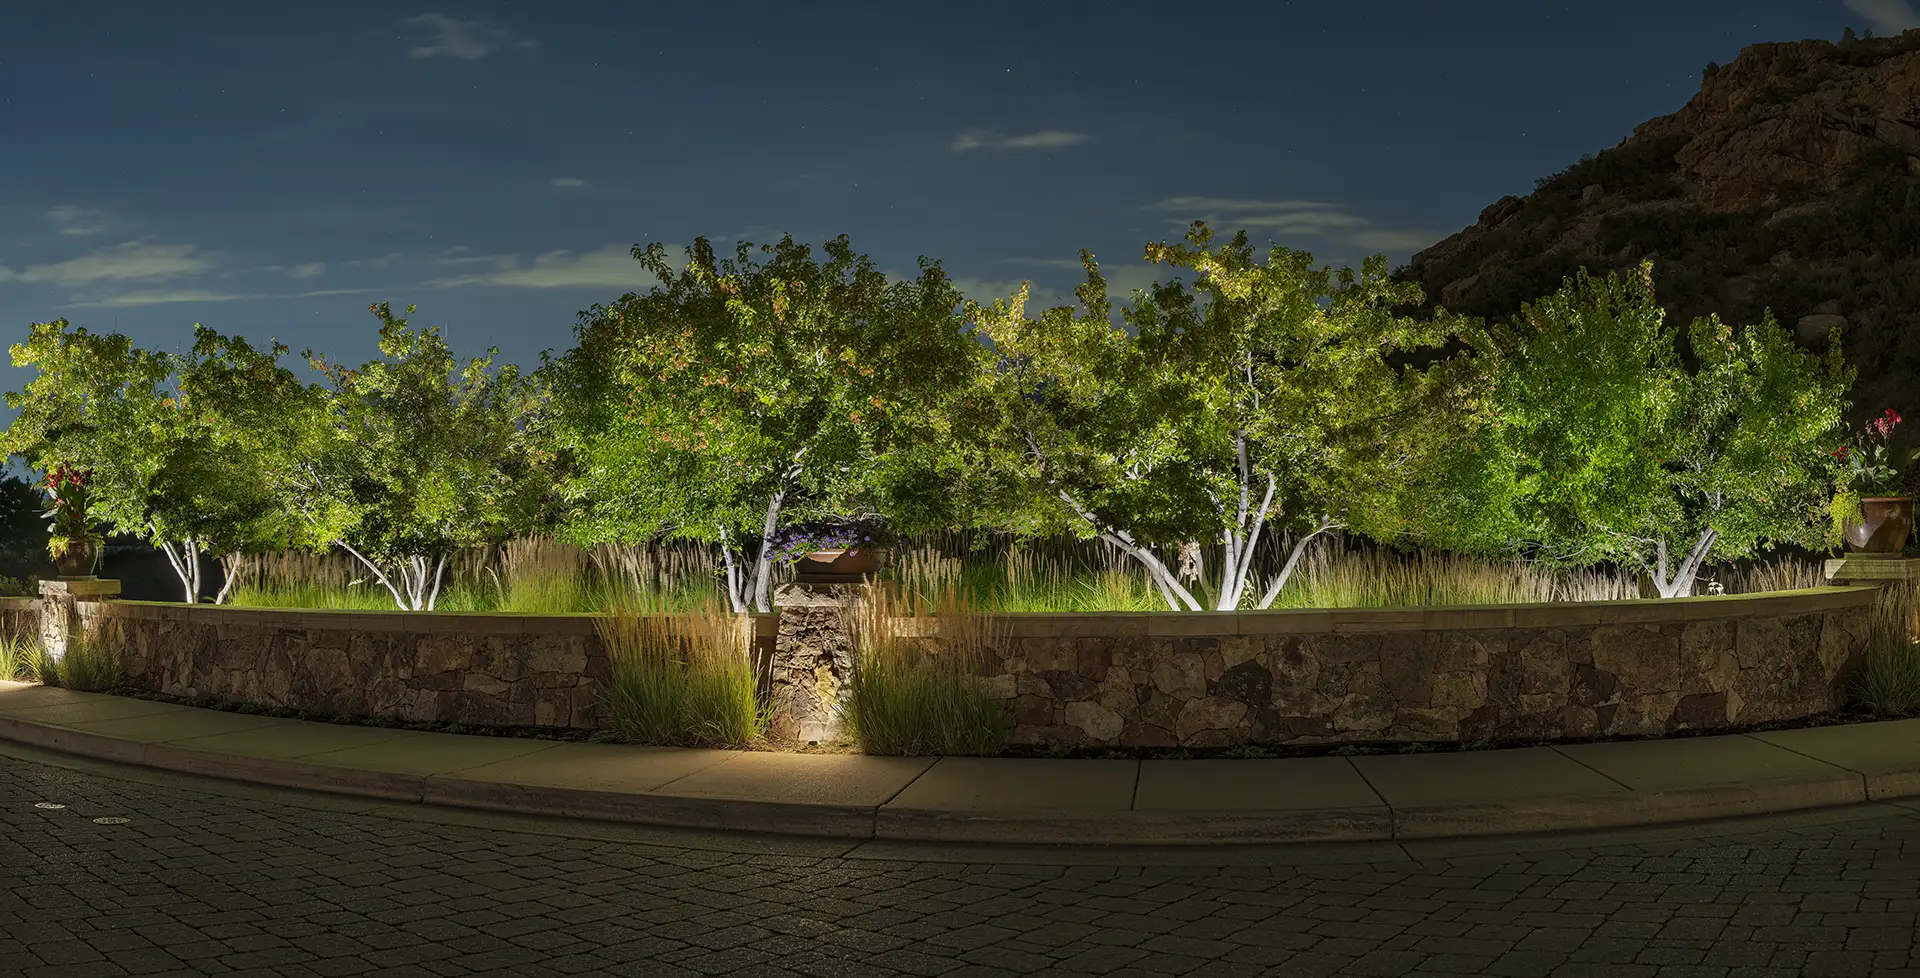 Ravenna image 3 landscaping trees wall Lighthouse Outdoor Lighting and Audio Denver CO